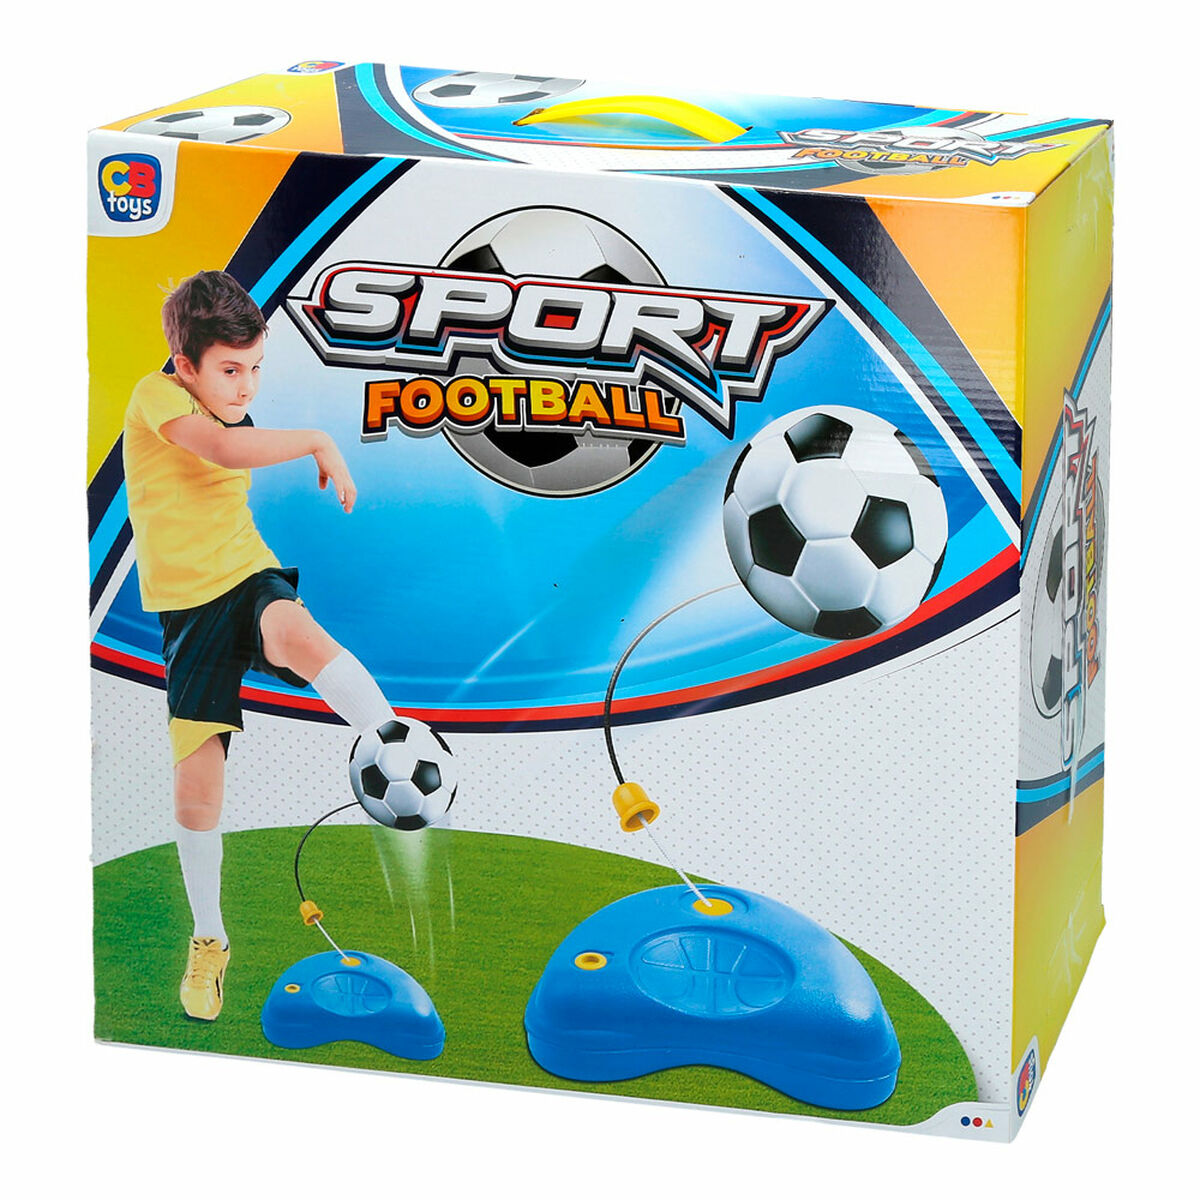 Football Colorbaby Training With support Plastic (2 Units)